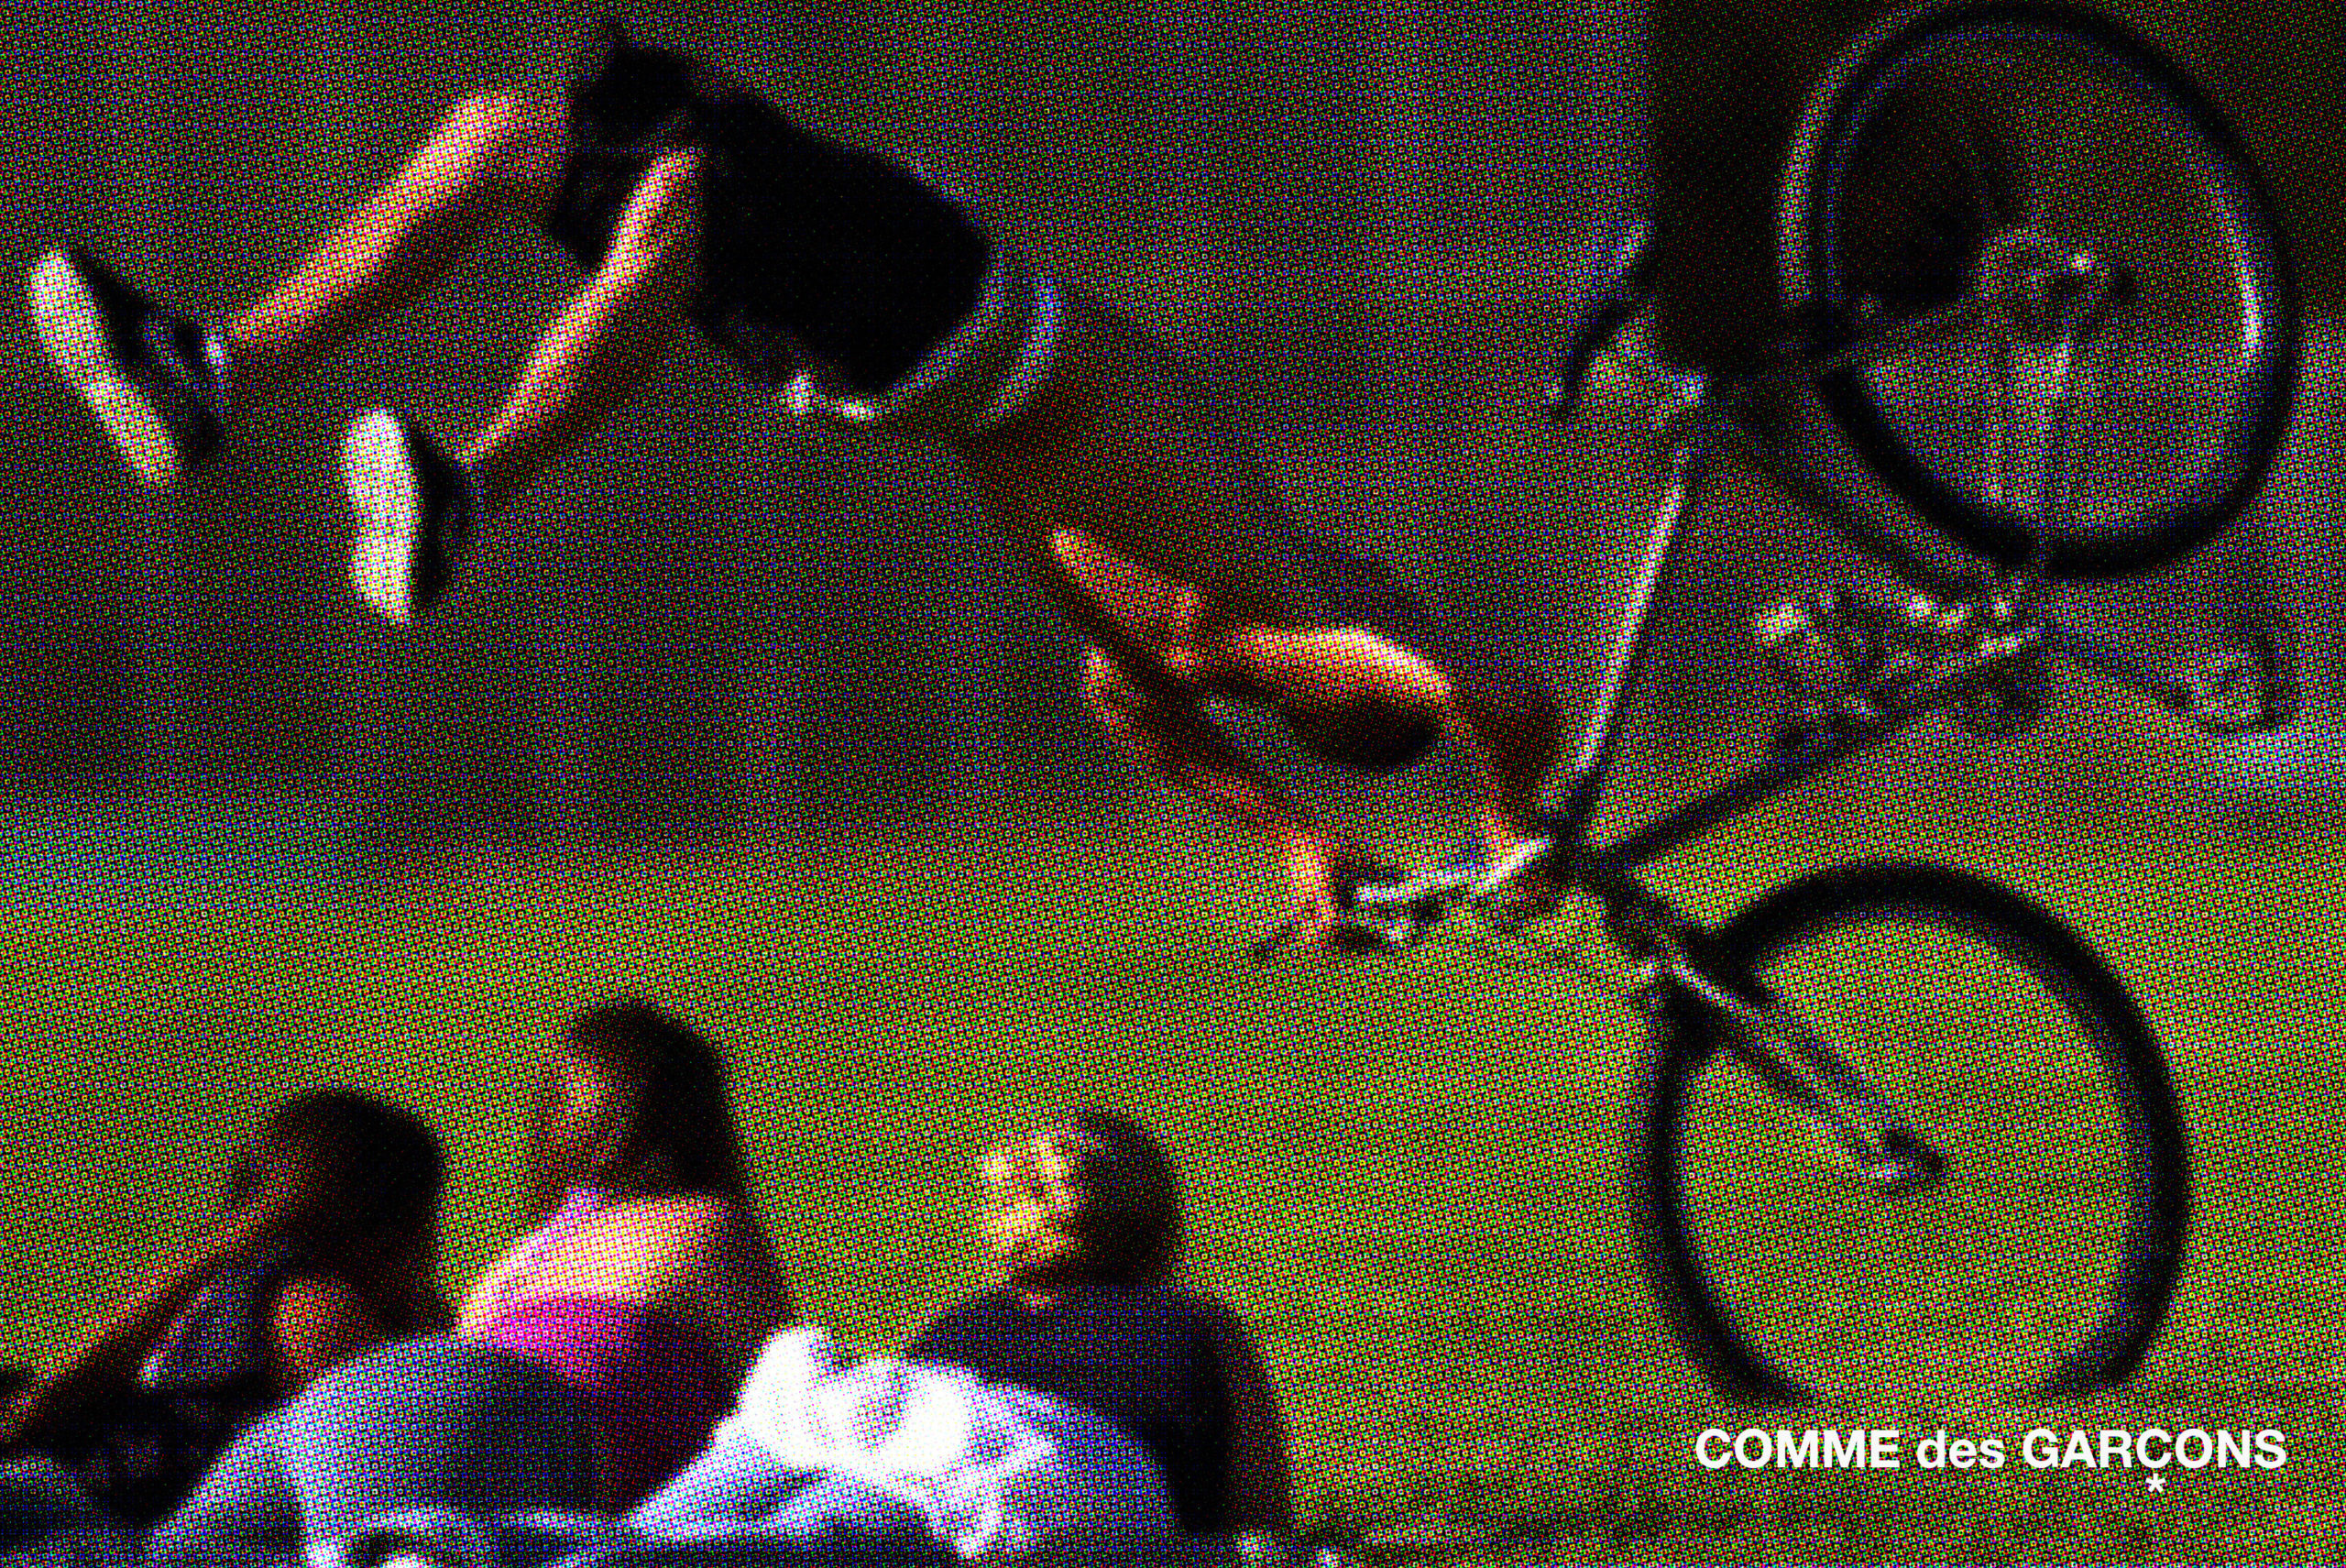 (a halftone image of a shirtless person falling backward over the handlebars of a bicycle as three onlookers observe from their position lying on the grass)